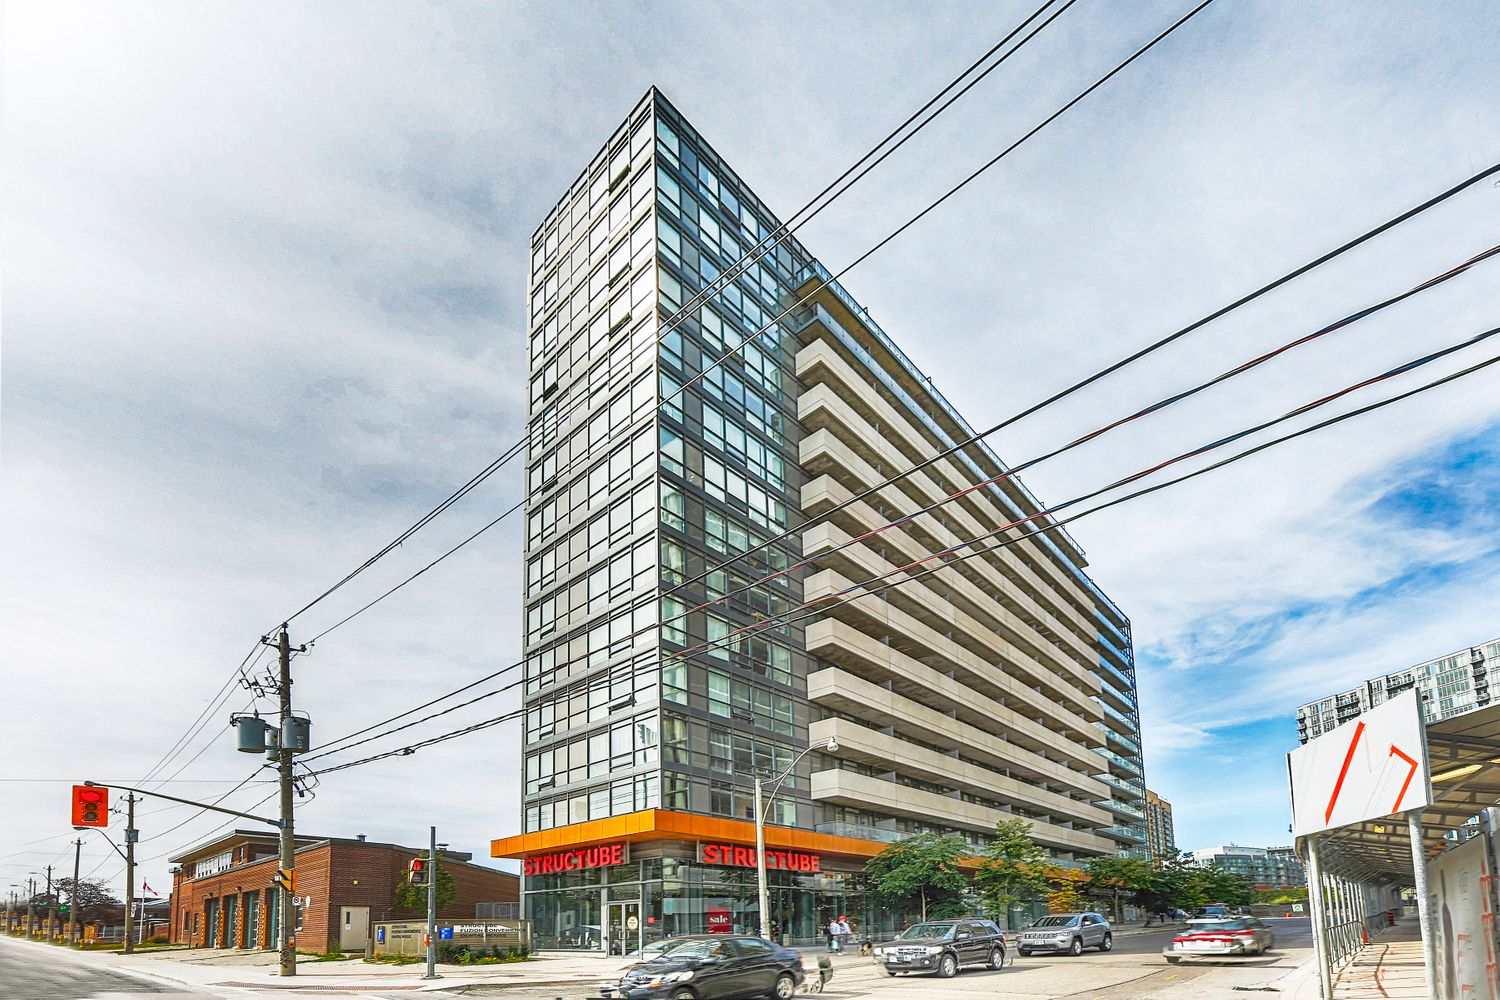 20 Joe Shuster Way. Fuzion is located in  West End, Toronto - image #1 of 5